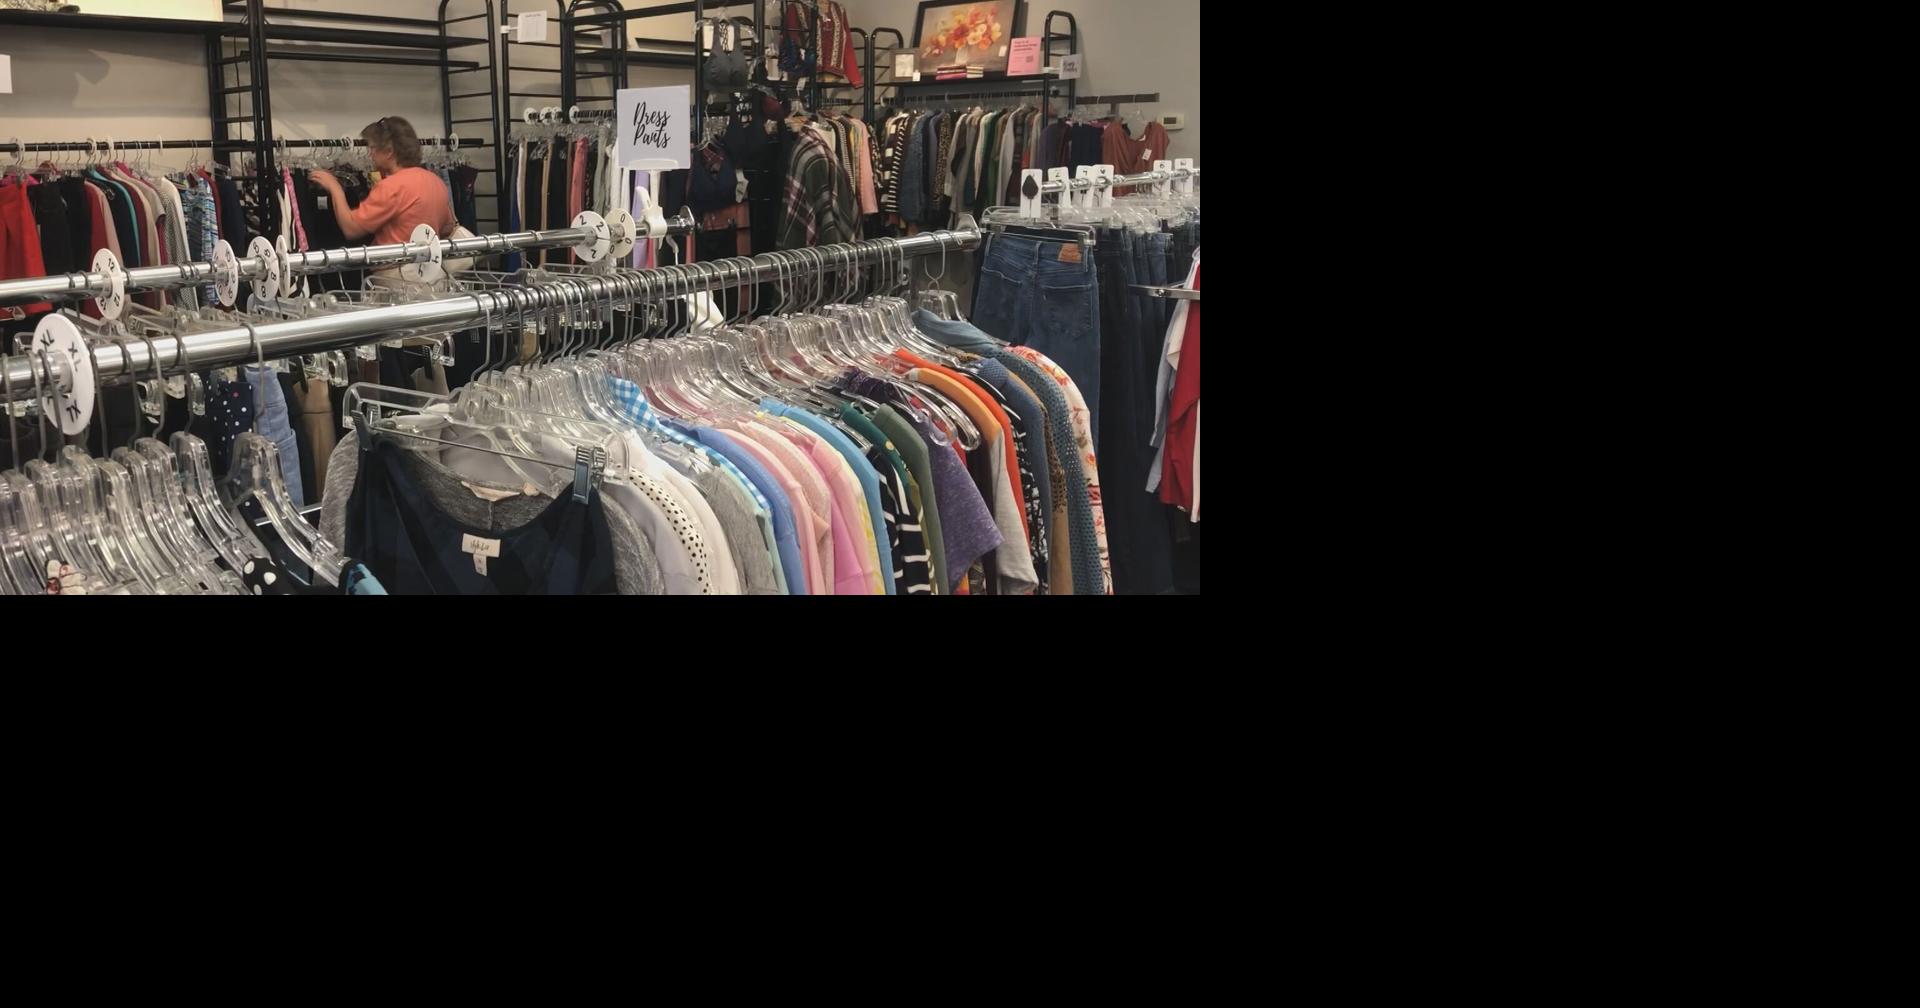 St. Paul consignment boutique Elite Repeat closing after 50 years